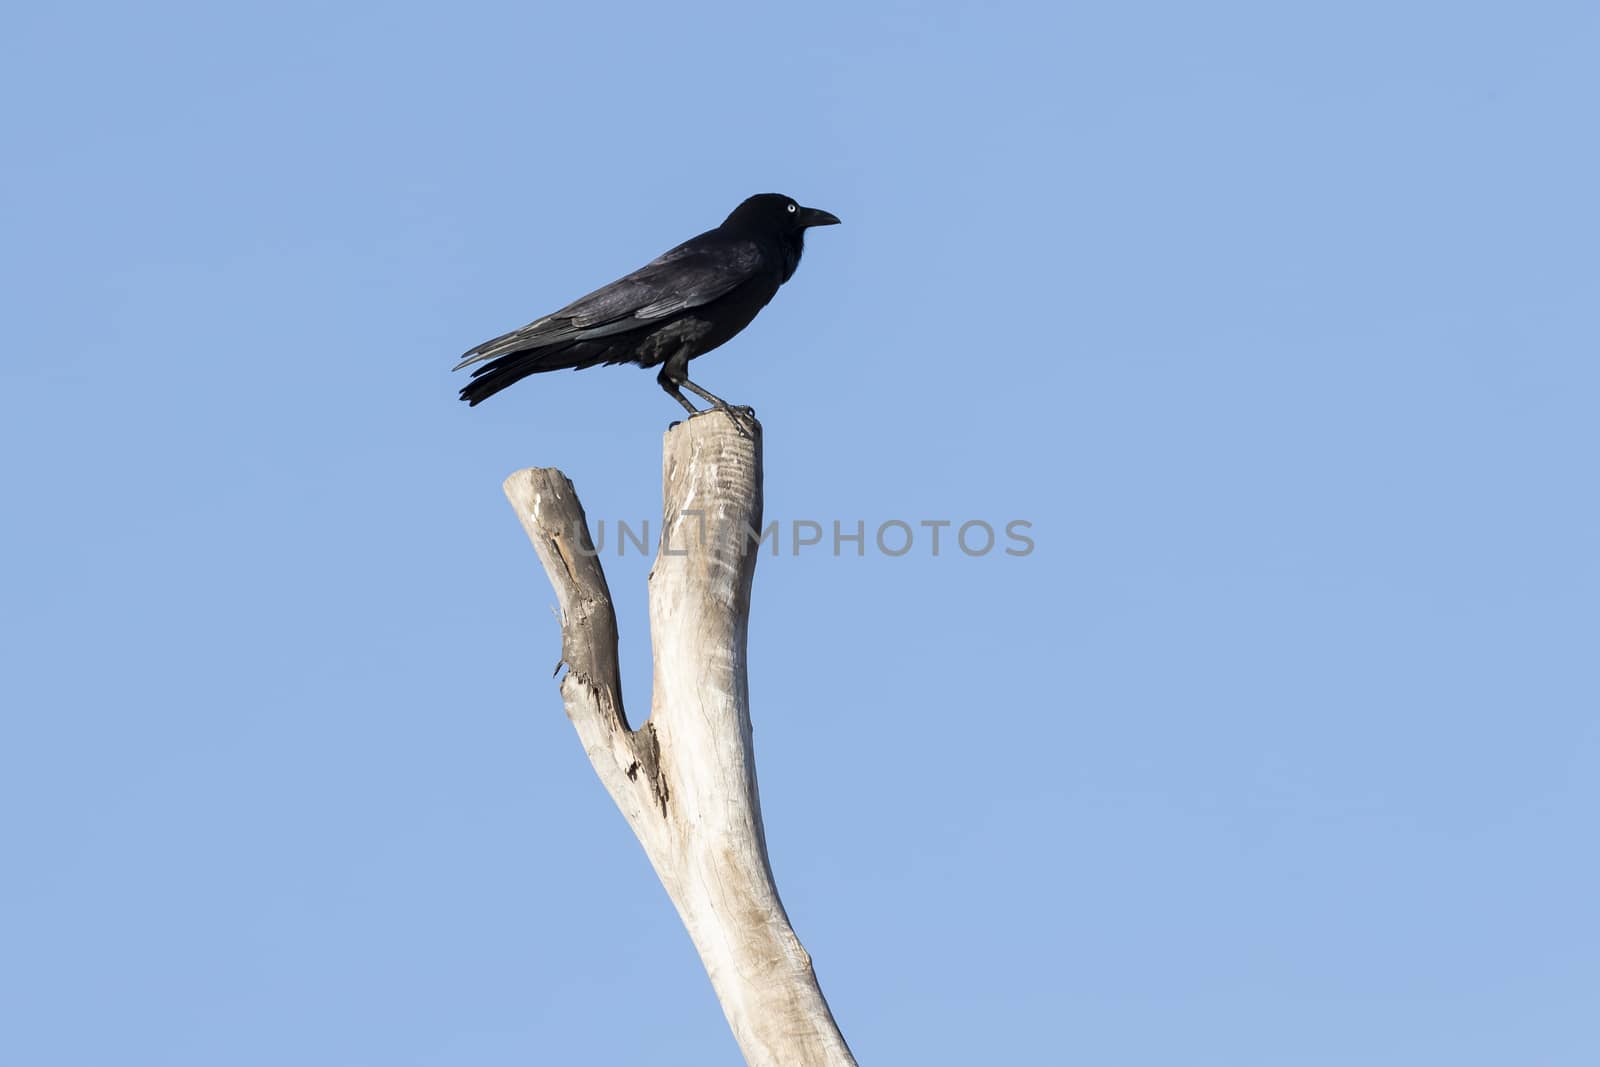 A black Crow standning on a dead tree branch with blue sky backg by WittkePhotos